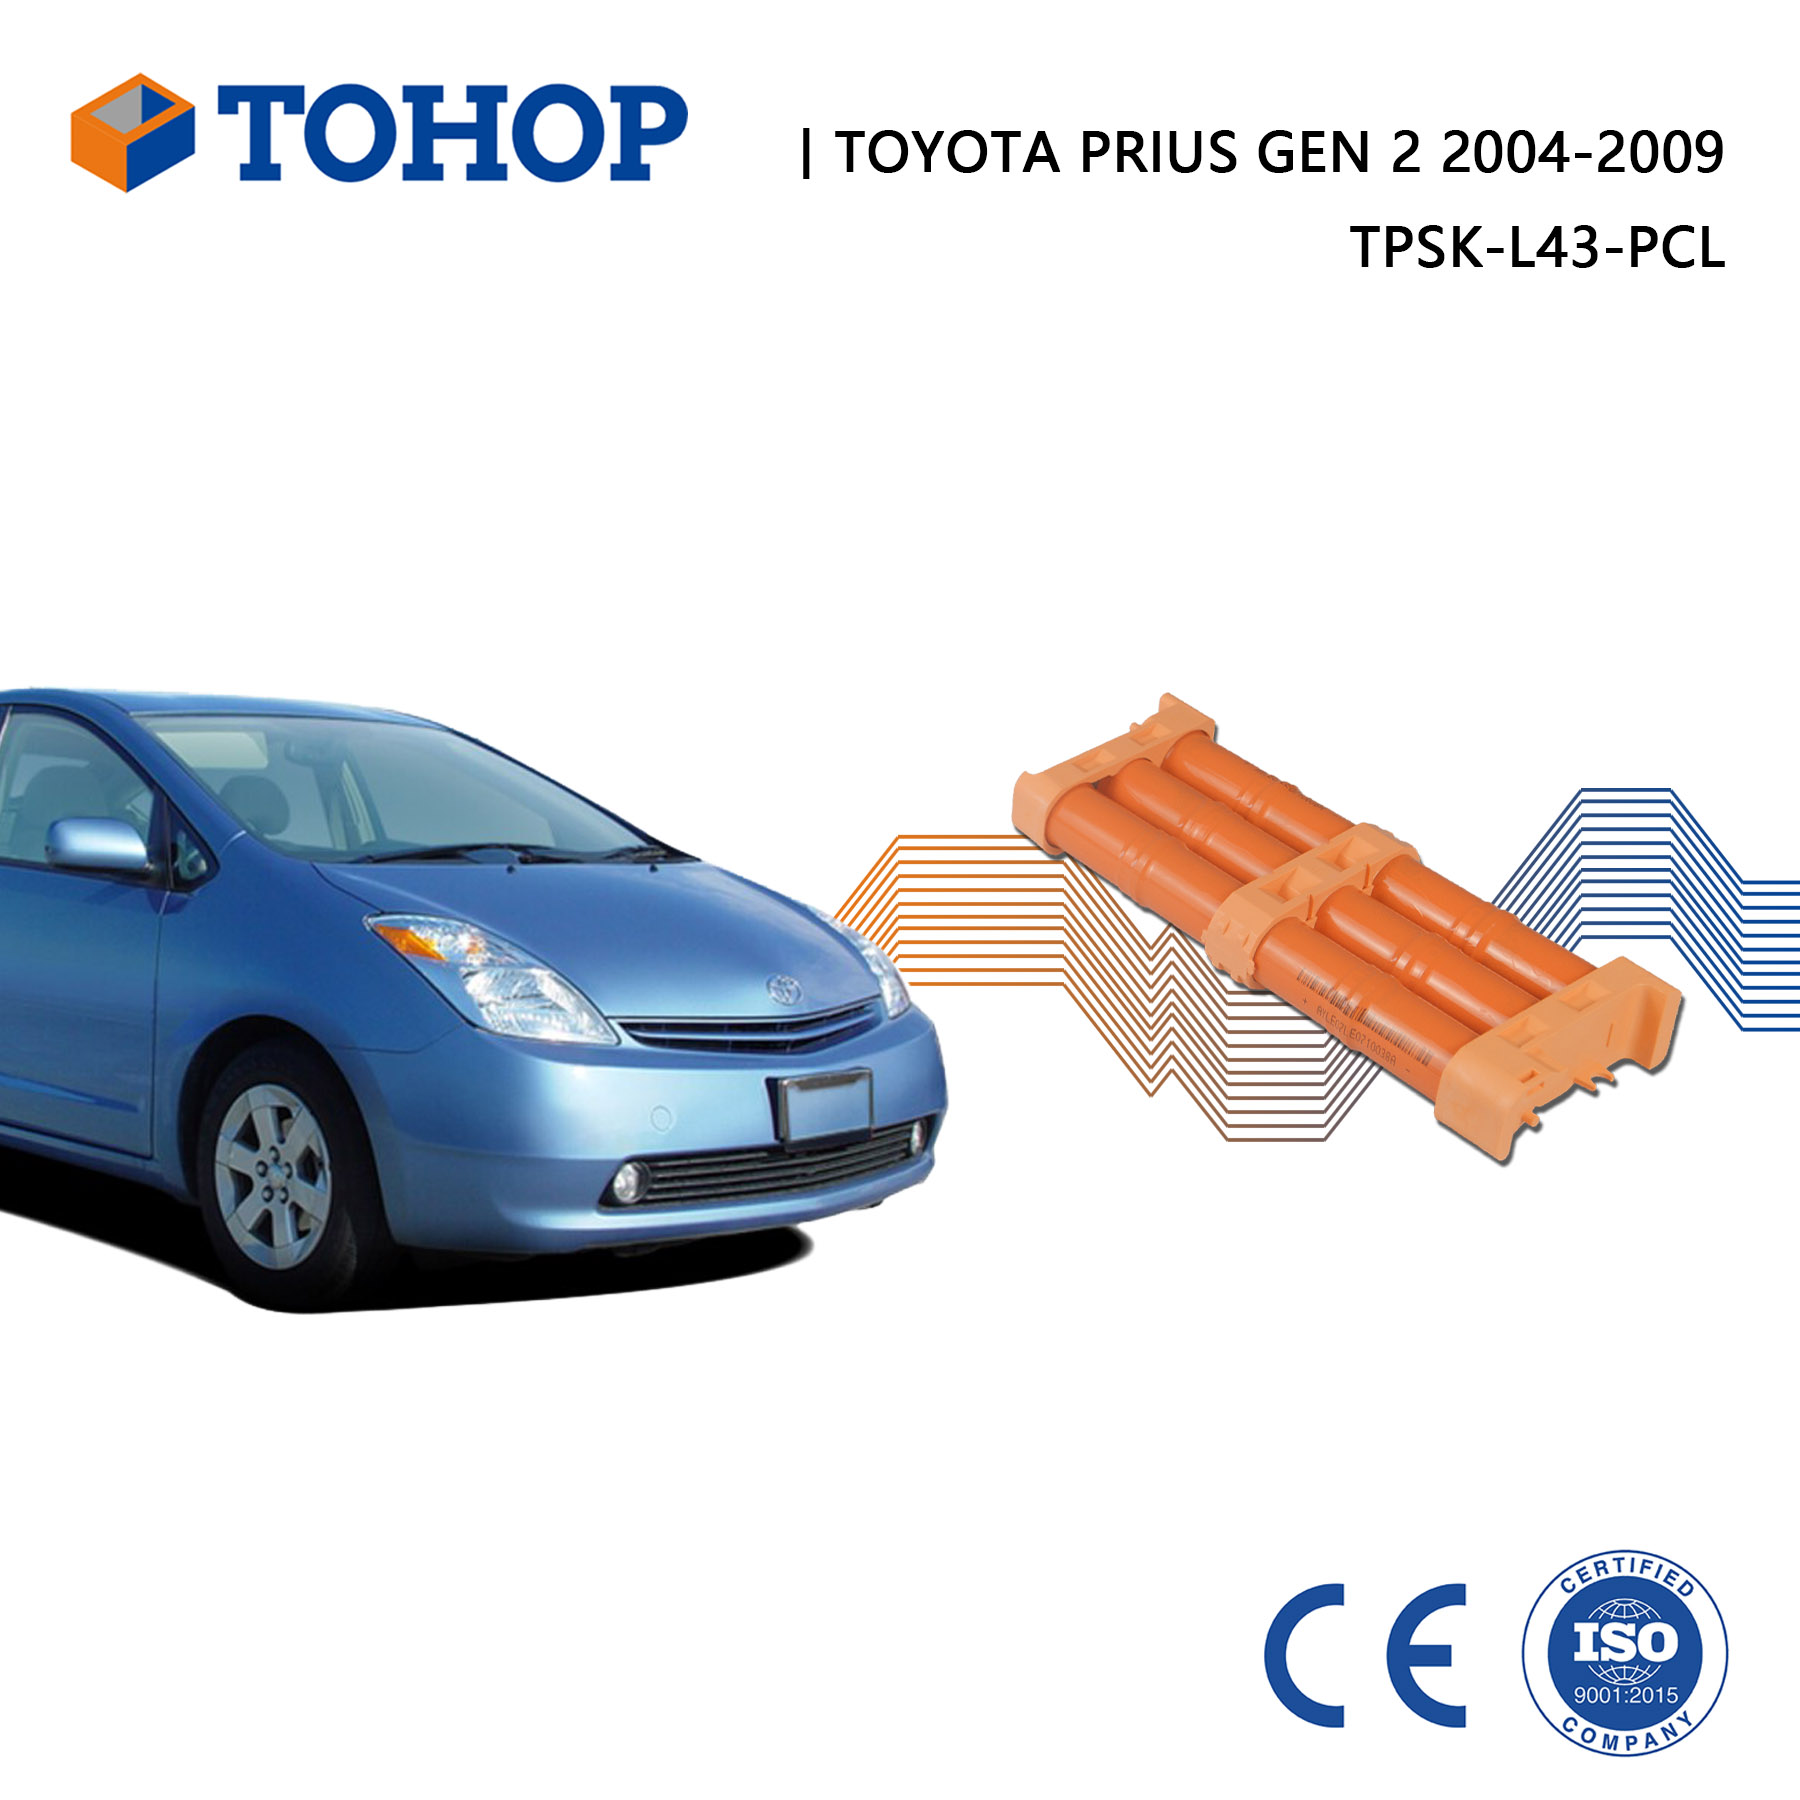 14.4V 6.5AH Gen 2 Toyota Prius Hybrid Battery Remplacement Cell